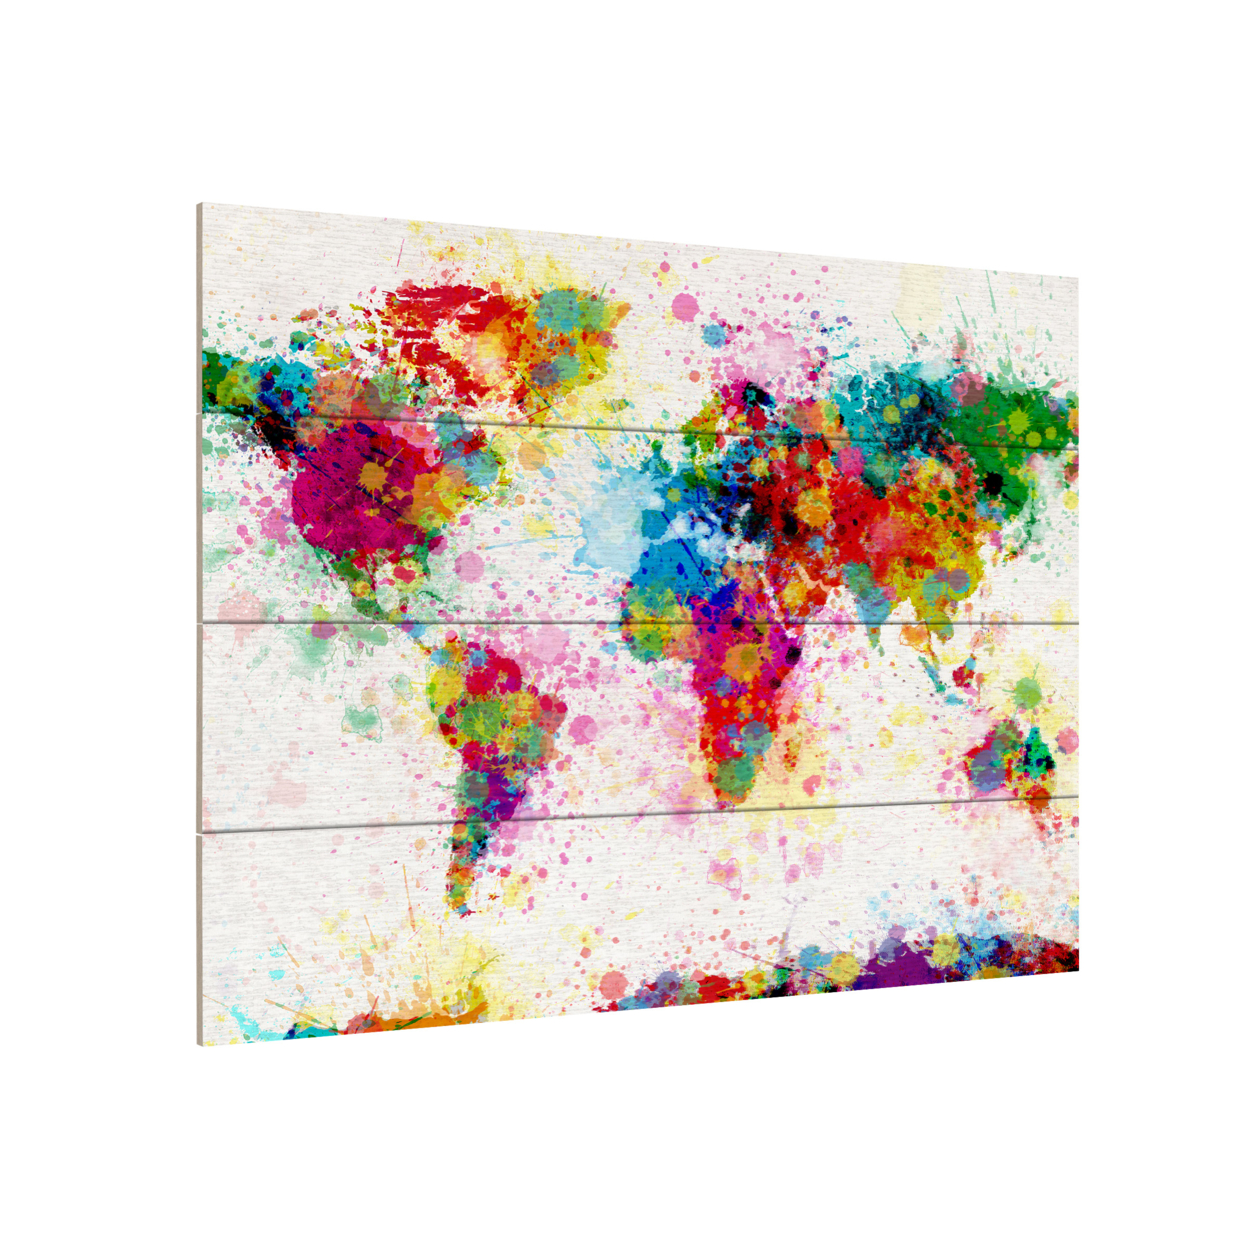 Wall Art 12 X 16 Inches Titled Paint Splashes World Map Ready To Hang Printed On Wooden Planks